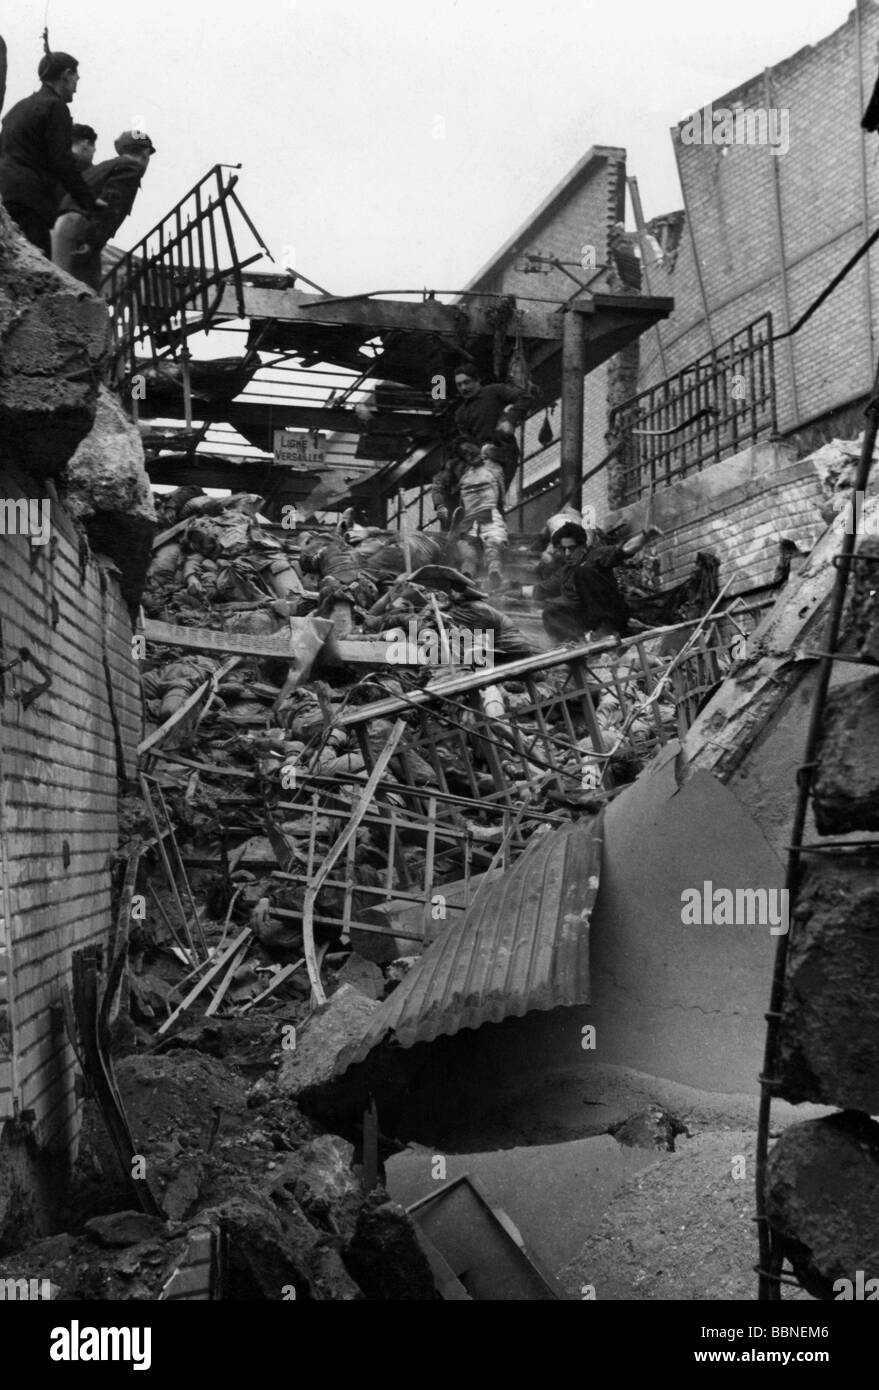 events, Second World War / WWII, aerial warfare, France 1942 / 1943, US air raid on Paris, 4.4.1943, debris and corpses at the metro station Pont de Sevres, 20th century, historic, historical, United States Army Air Force, USAAF, bombing attack, destruction, steps, entrance, men, retrieving, dead bodies, victims, victim, death, underground, people, 1940s, Stock Photo